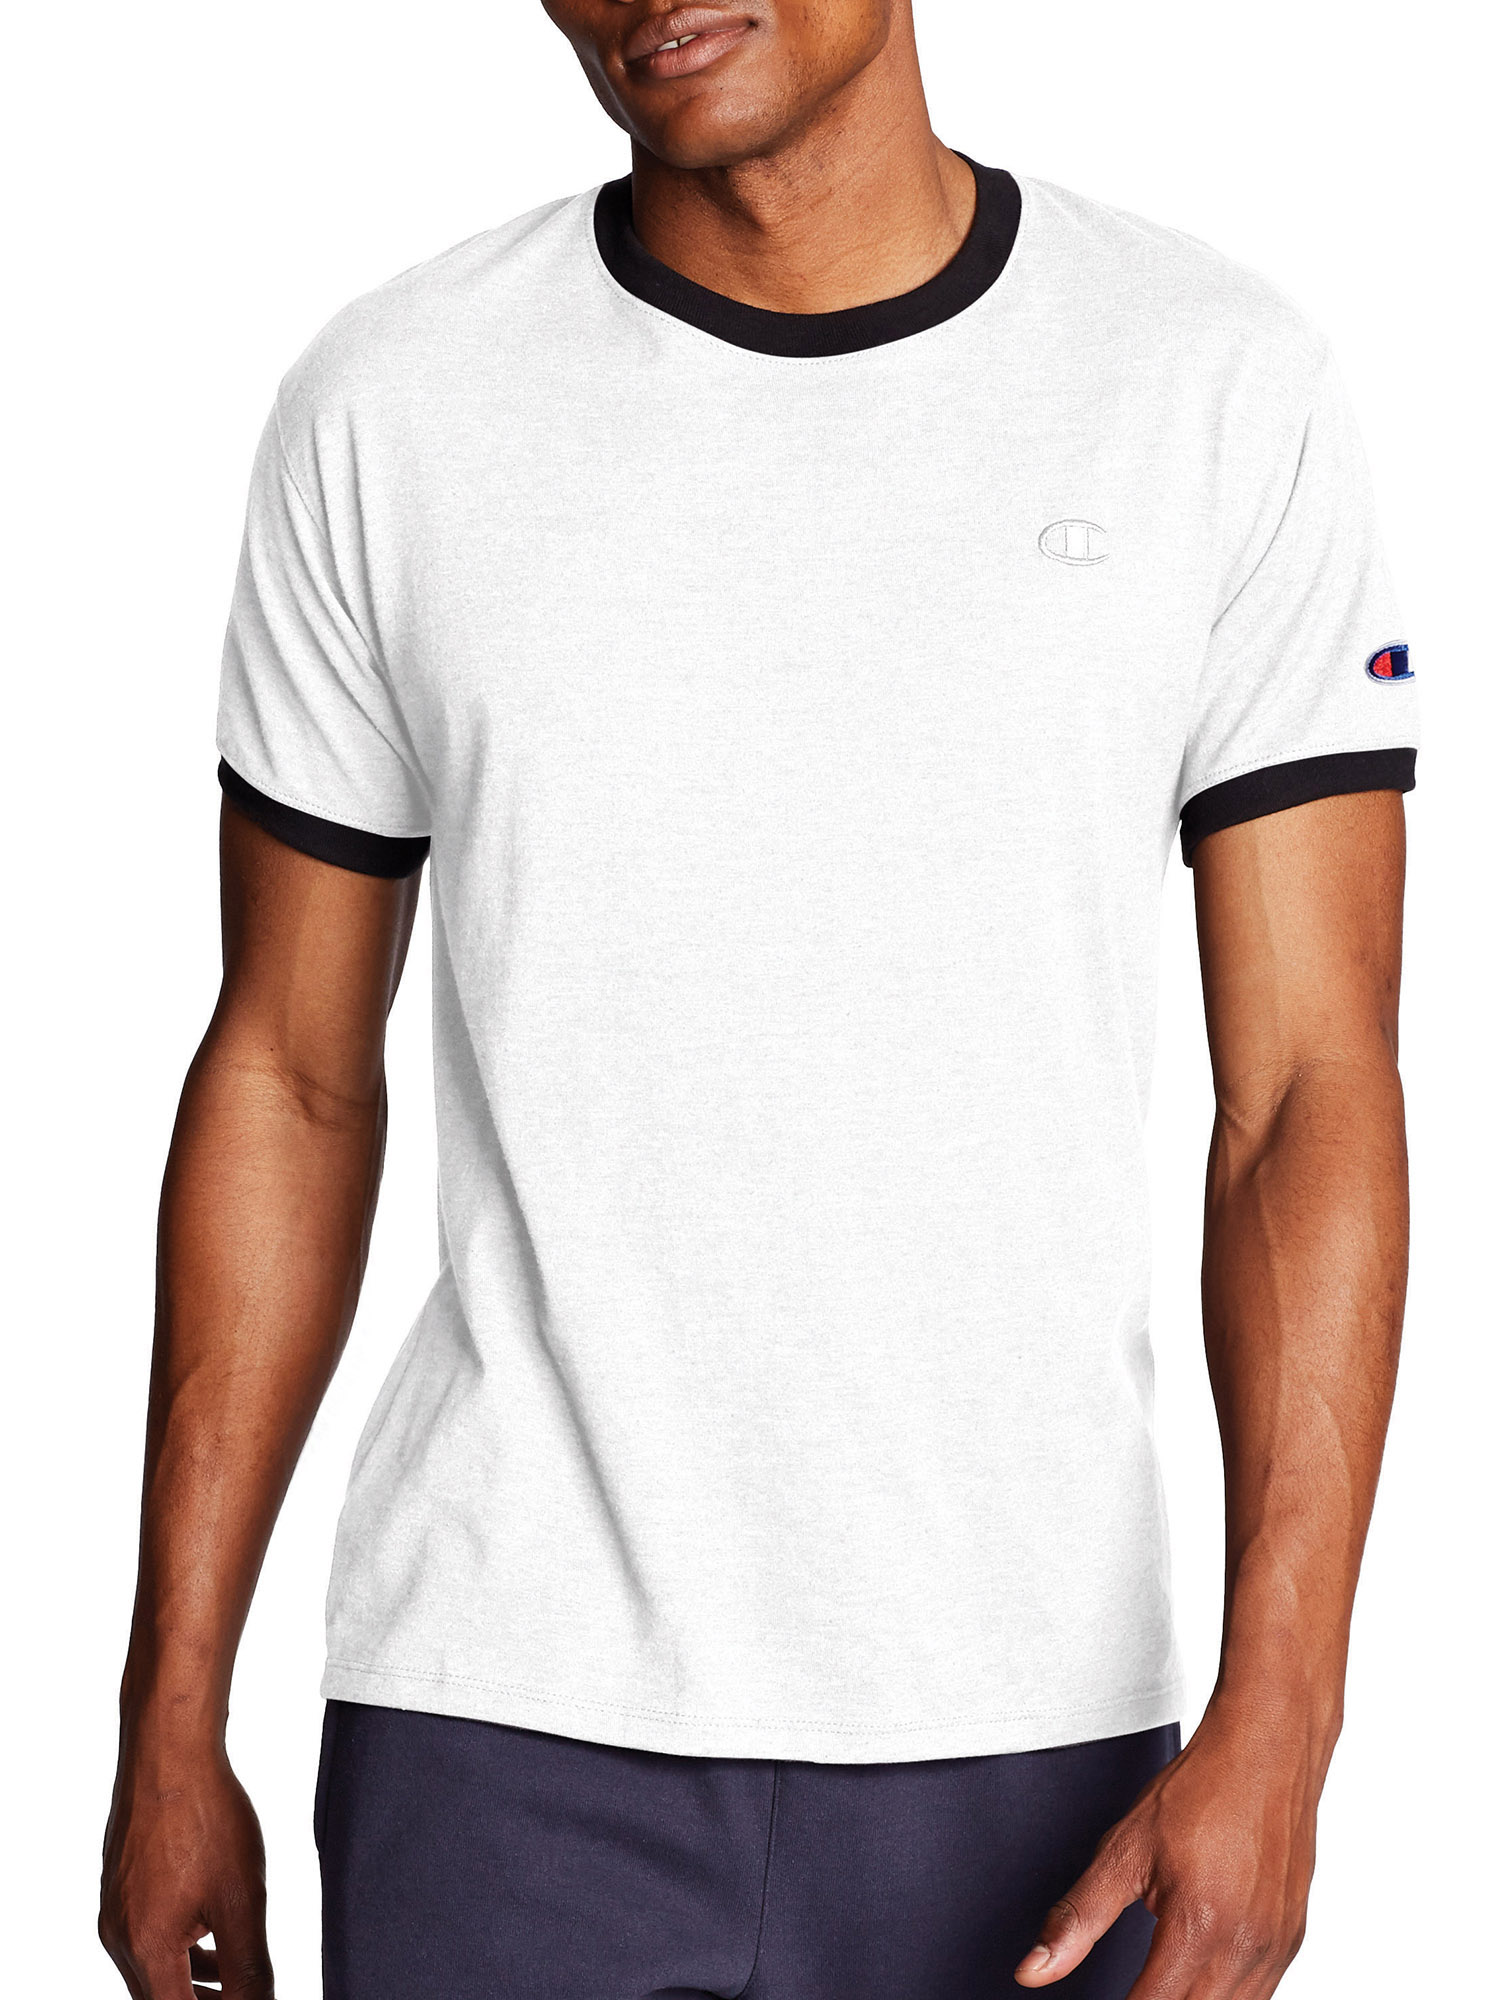 Champion Men's Classic Jersey Ringer Tee - image 1 of 7